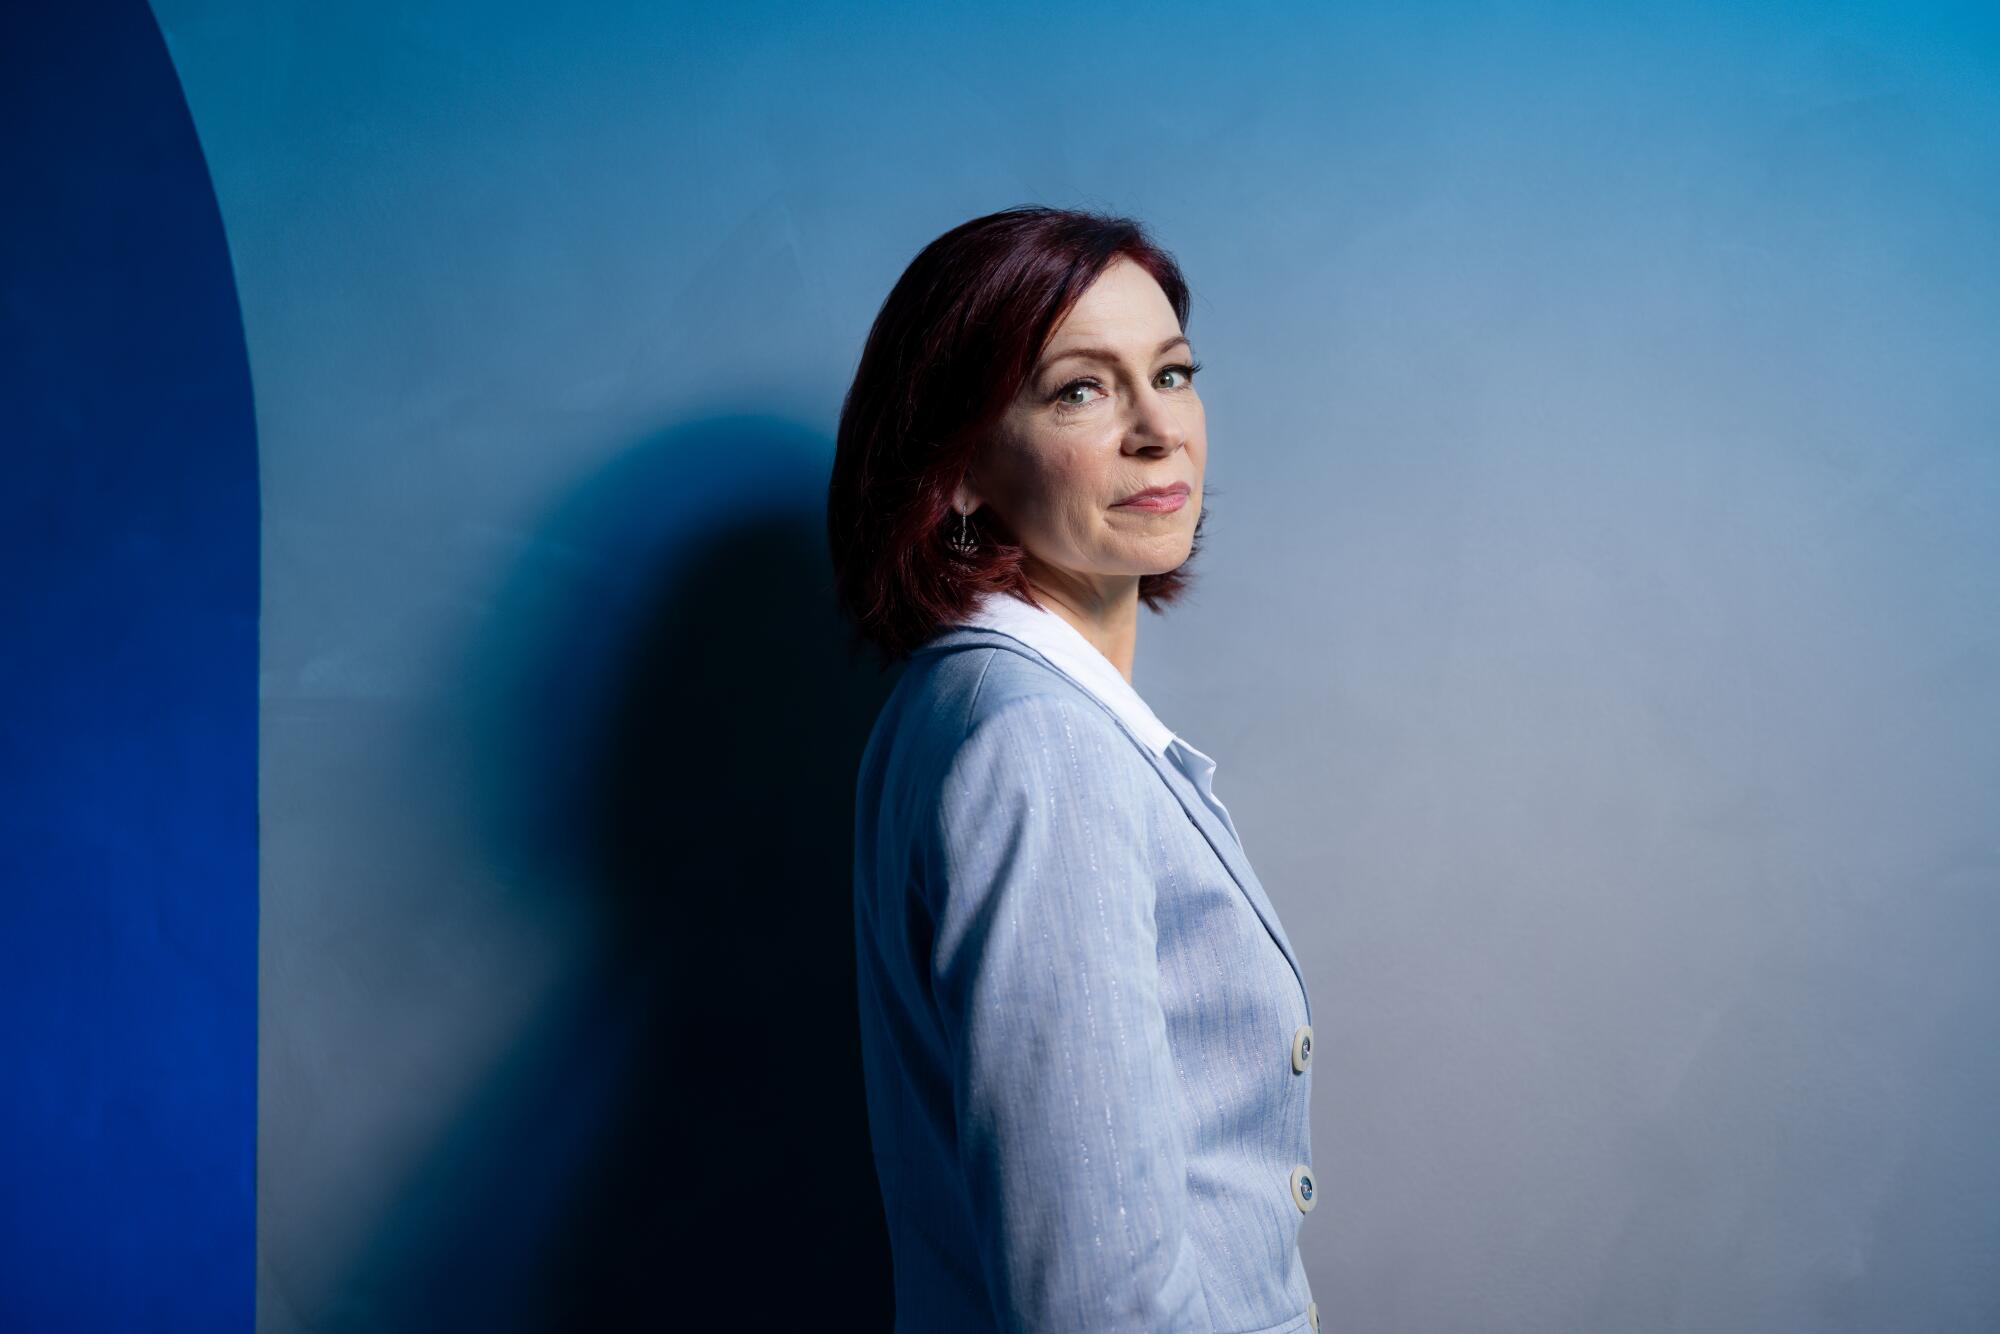 Carrie Preston turns her face toward the camera in a portrait.